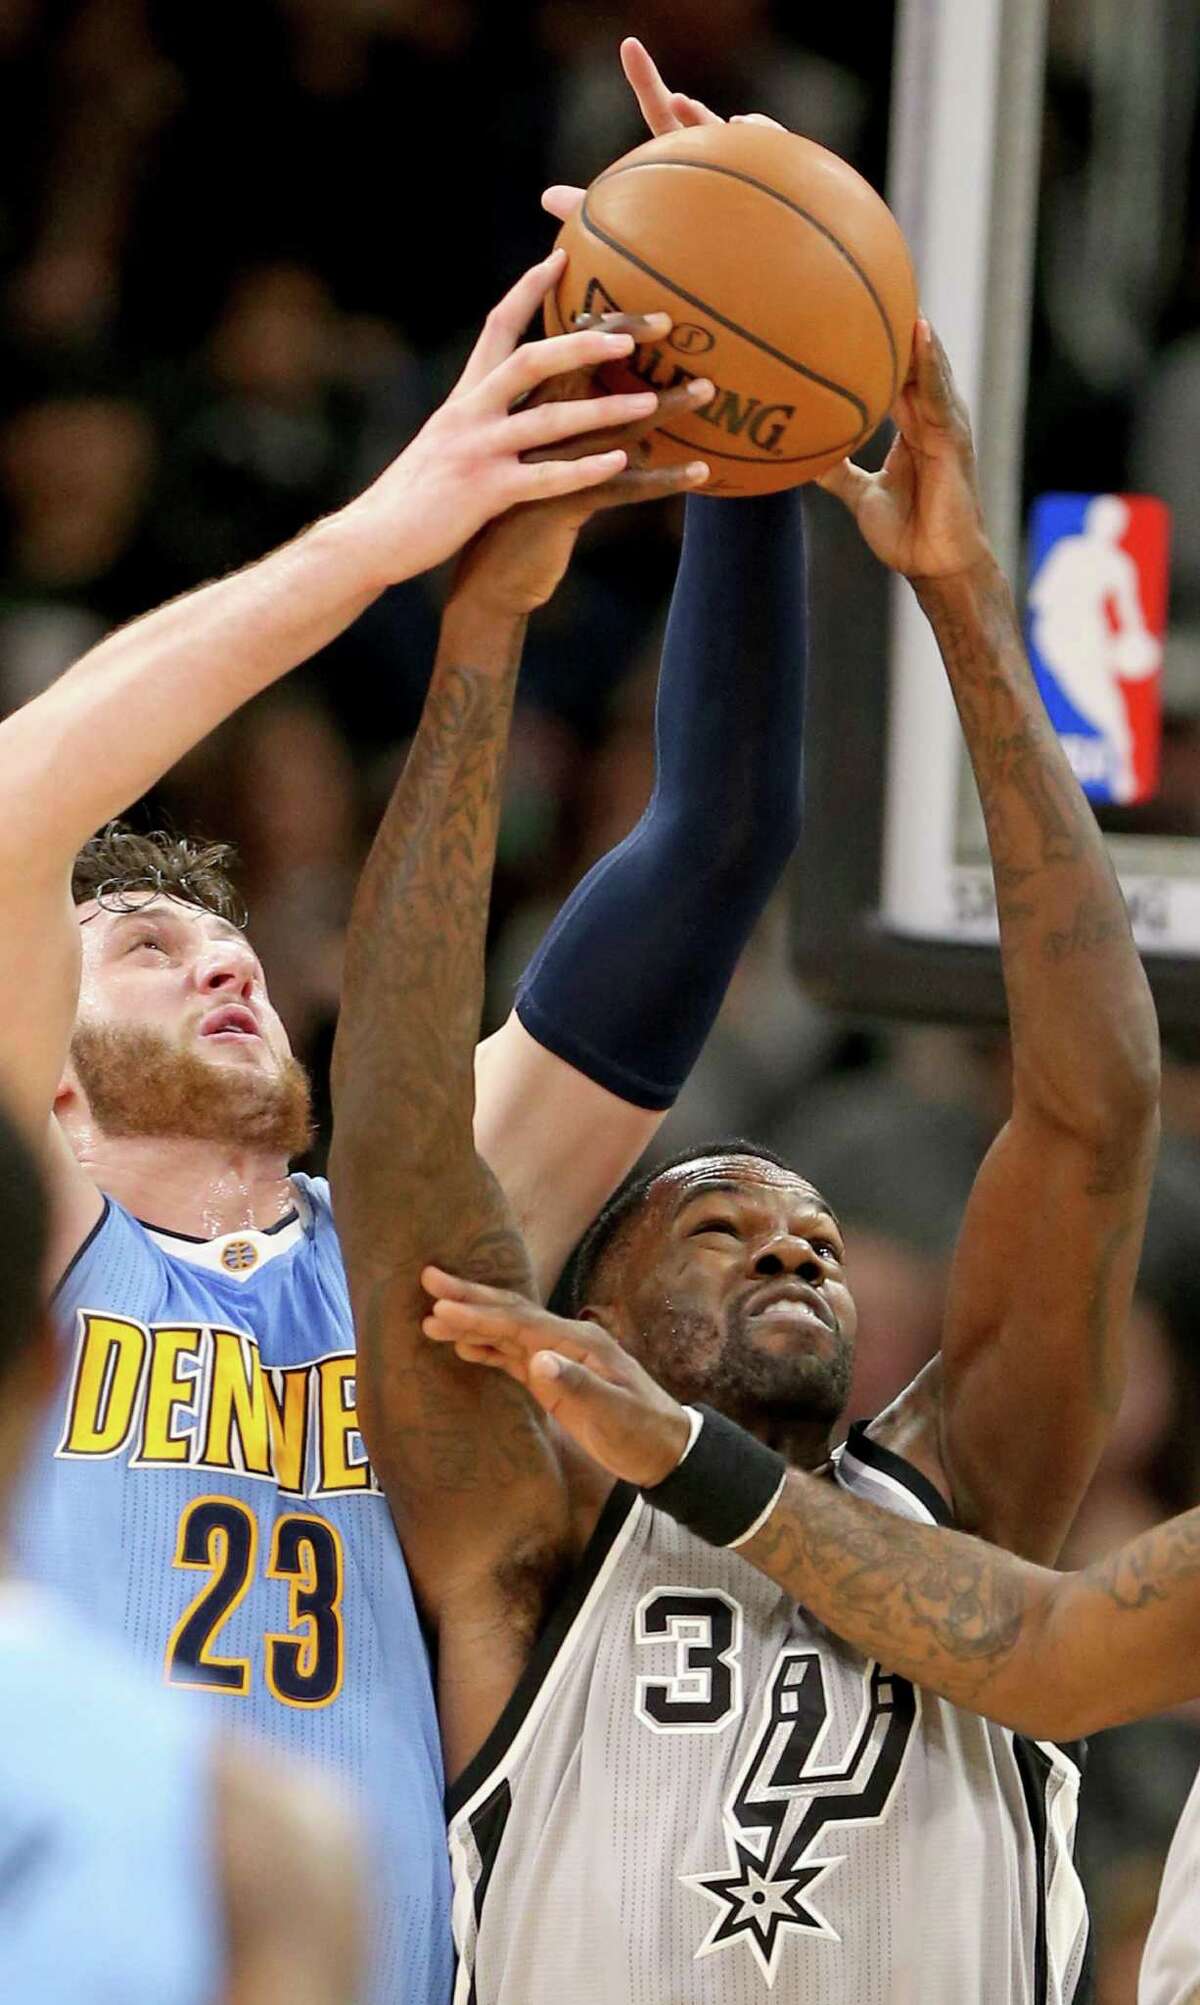 Denver Nuggets’ Jusuf Nurkic and the Spurs’ Dewayne Dedmon grab for a loose ball during first half action on Feb. 4, 2017 at the AT&T Center.